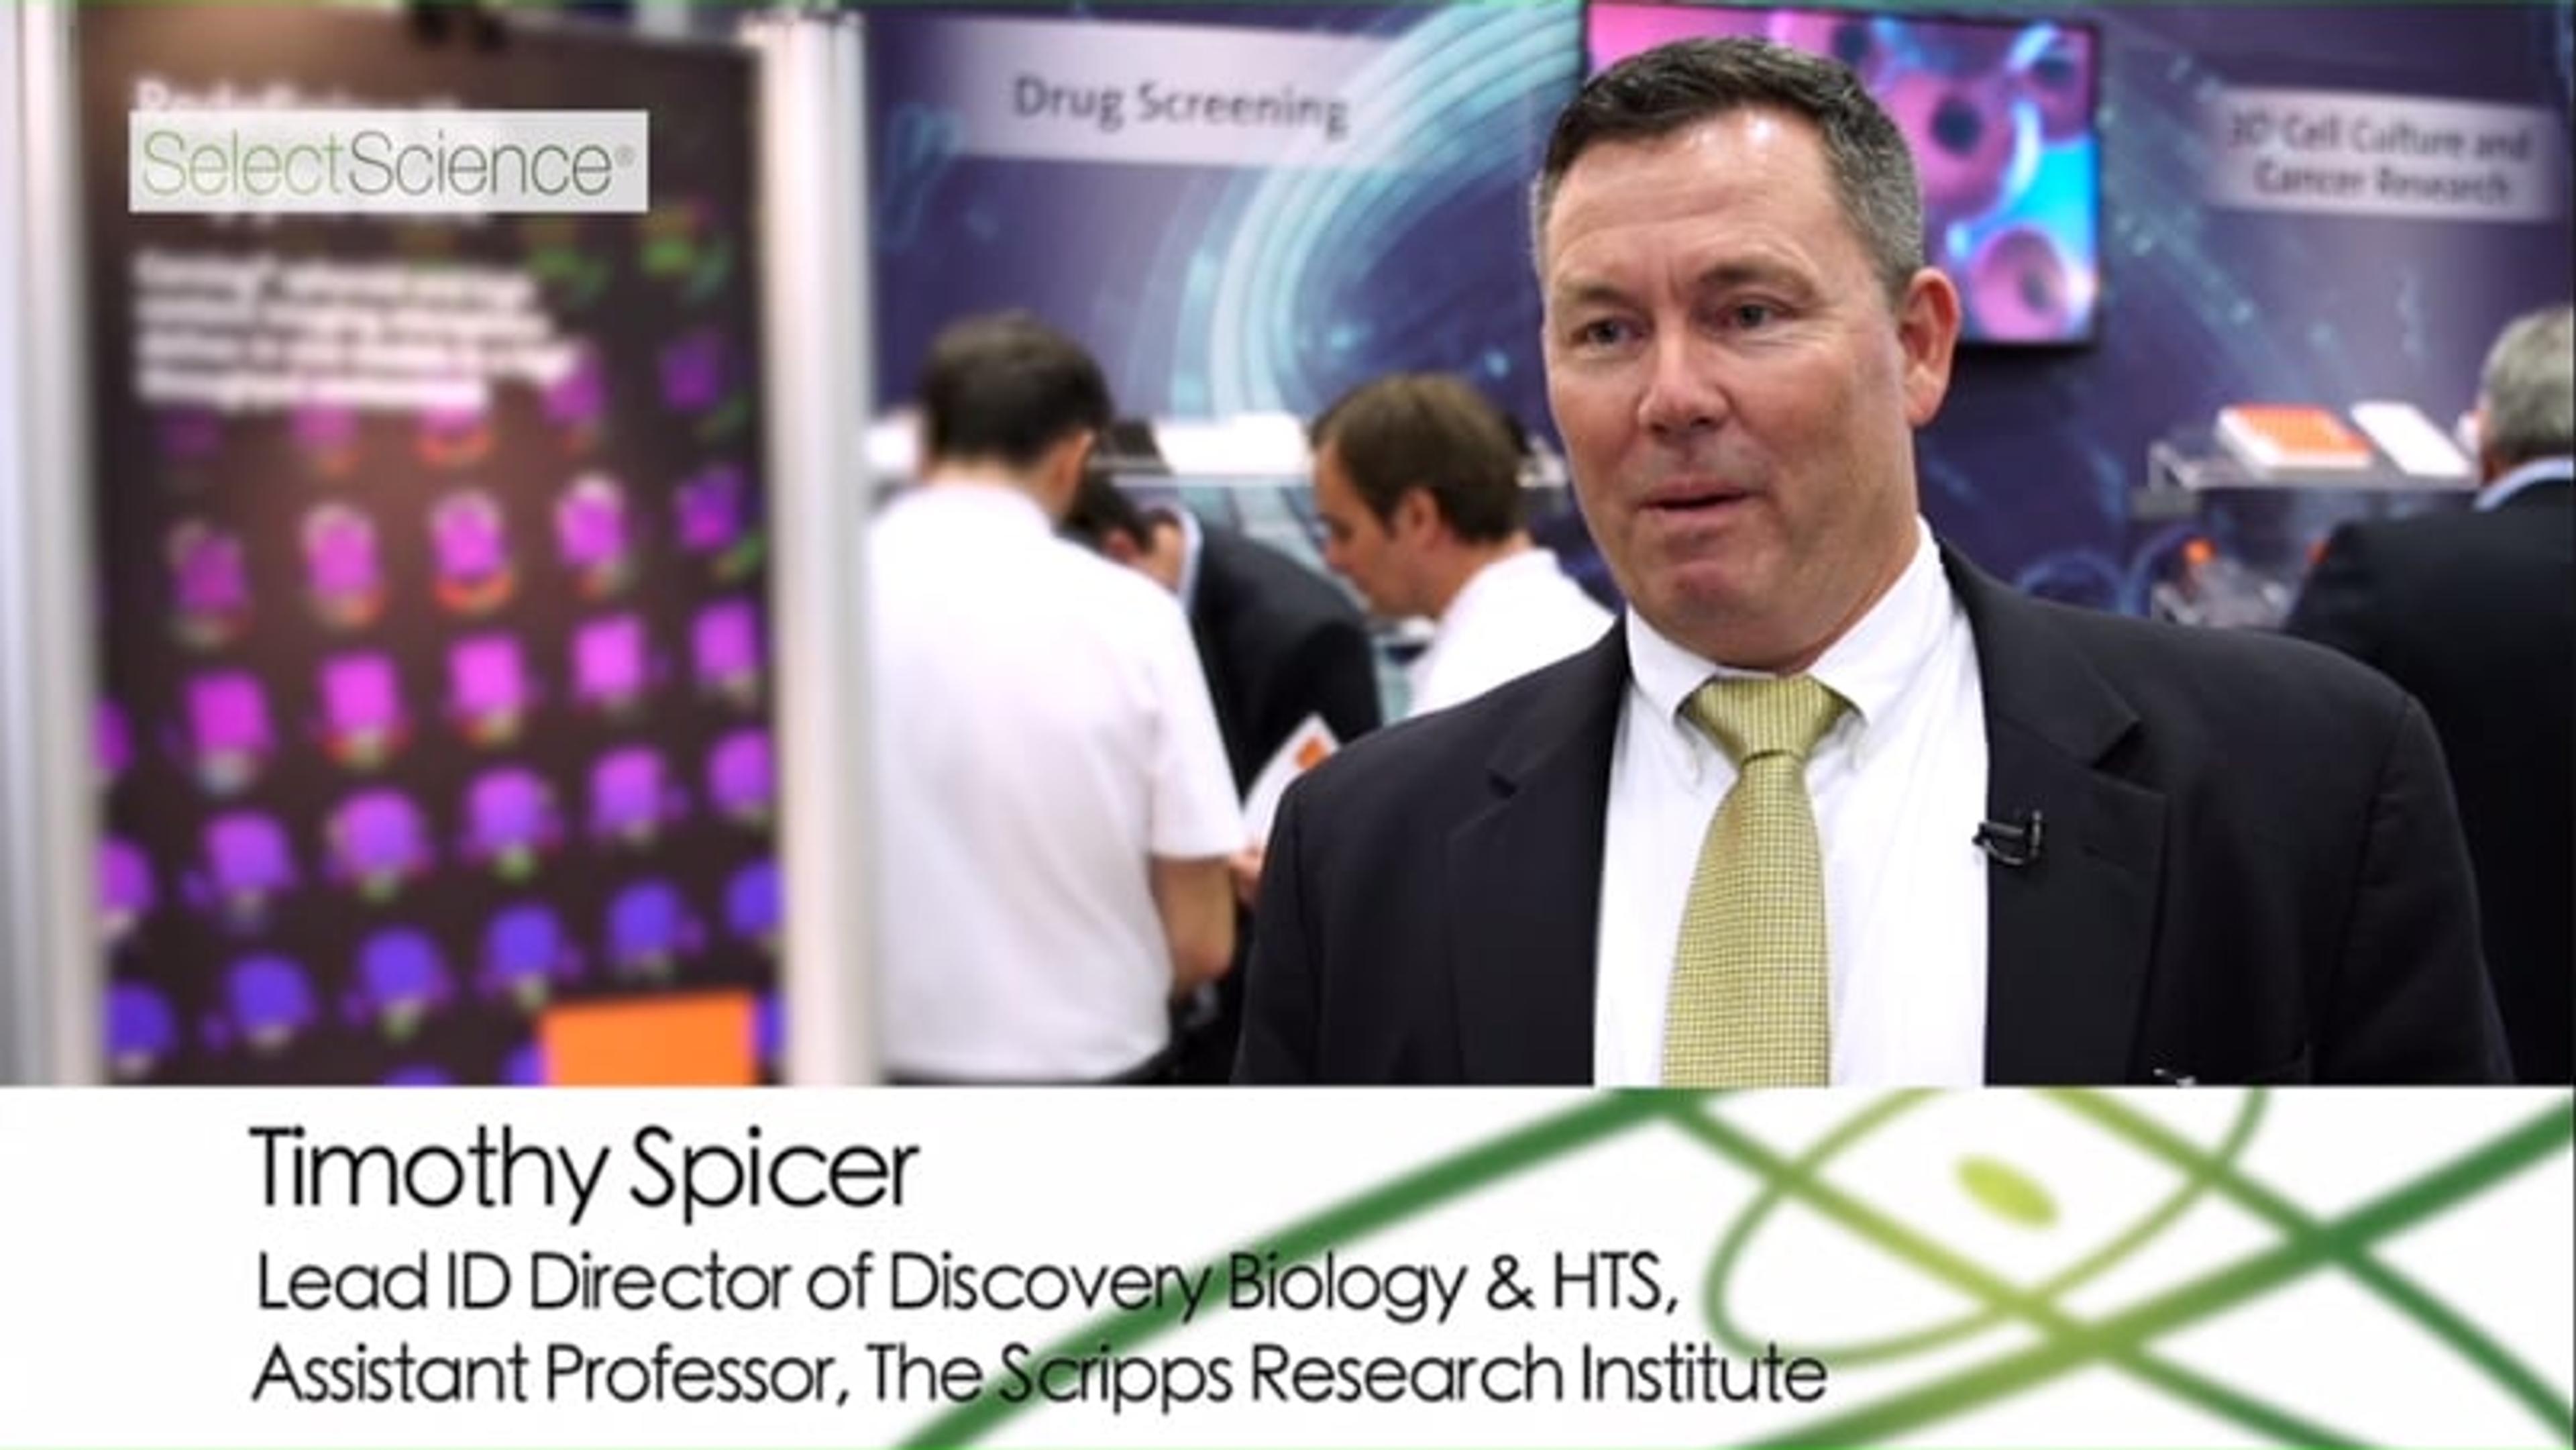 Advances in 3D Cell Culture for High Throughput Drug Screening